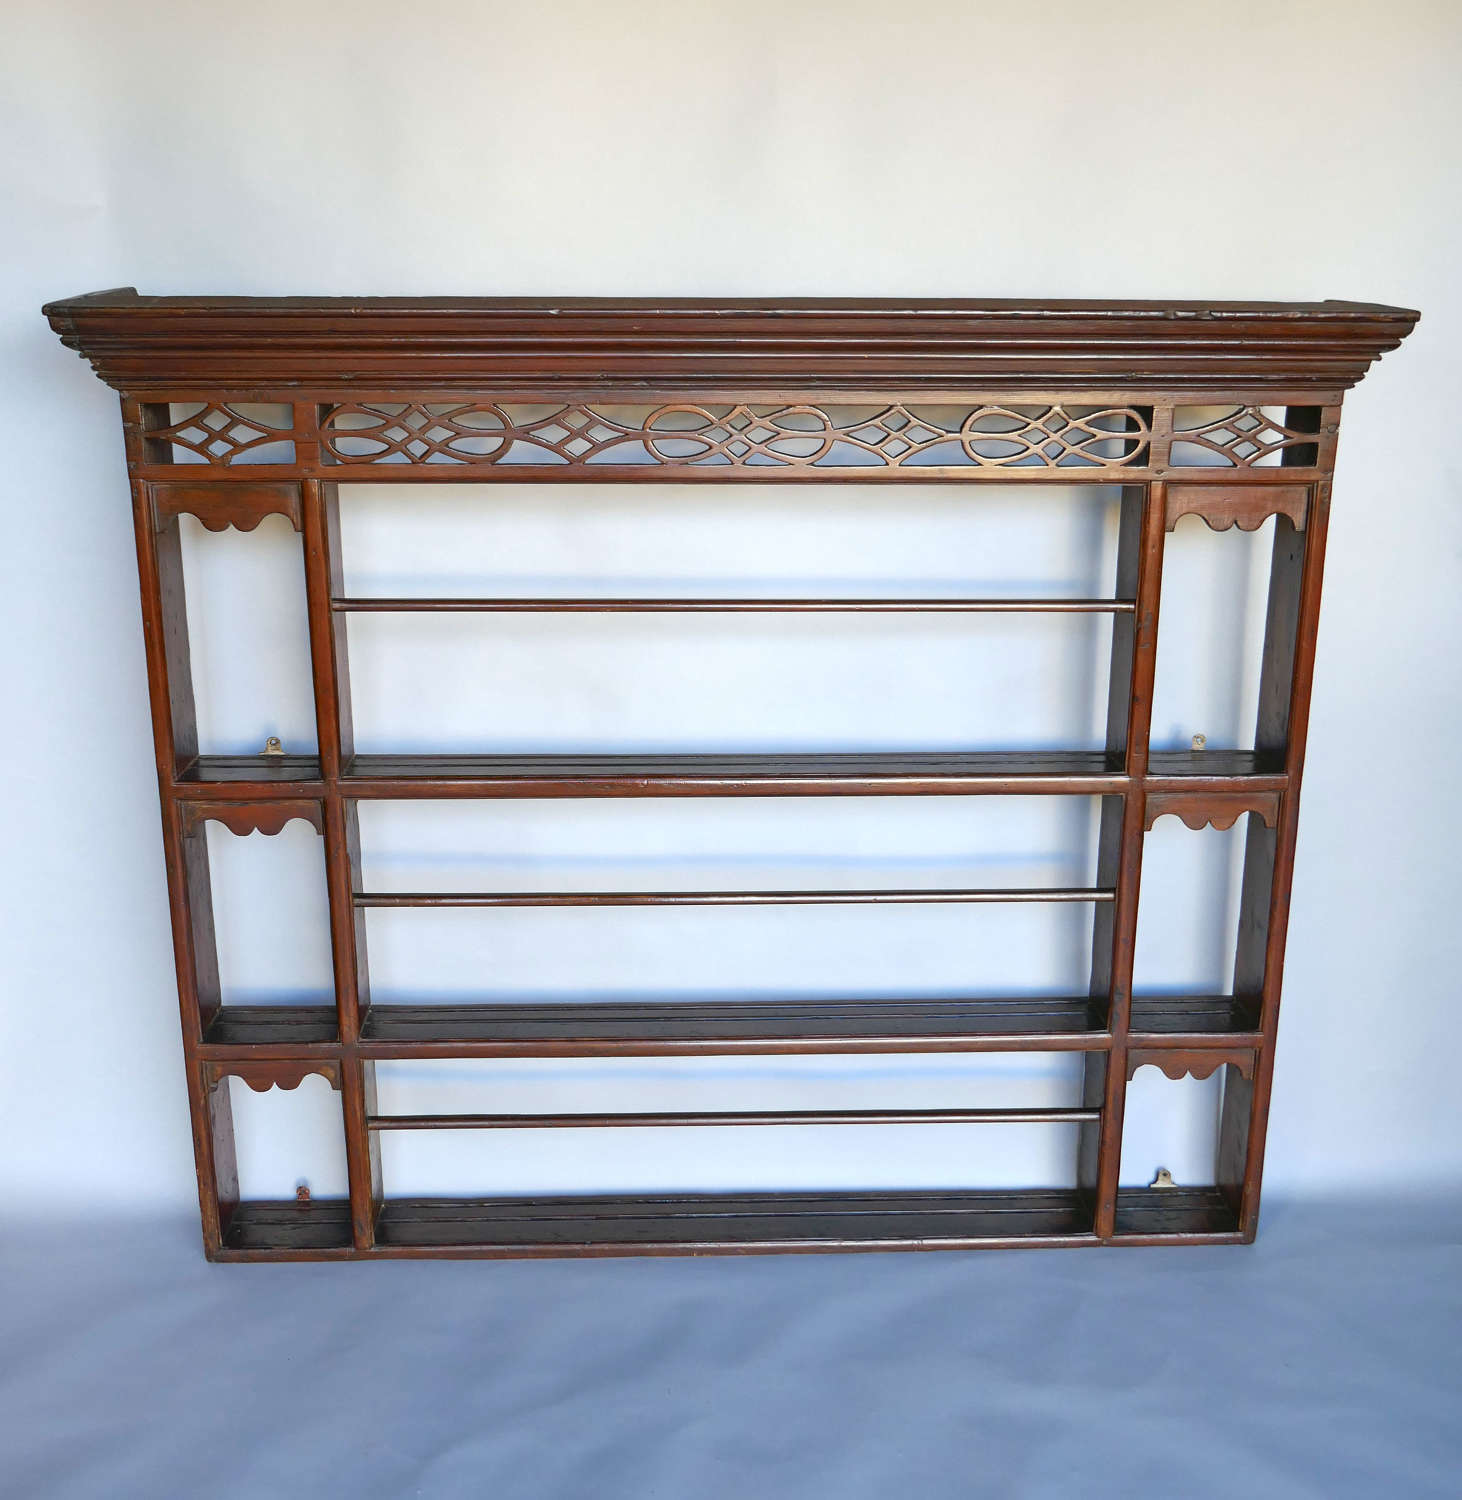 Antique Furniture 18thc Pine Delft Rack With Attractive Fretwork.